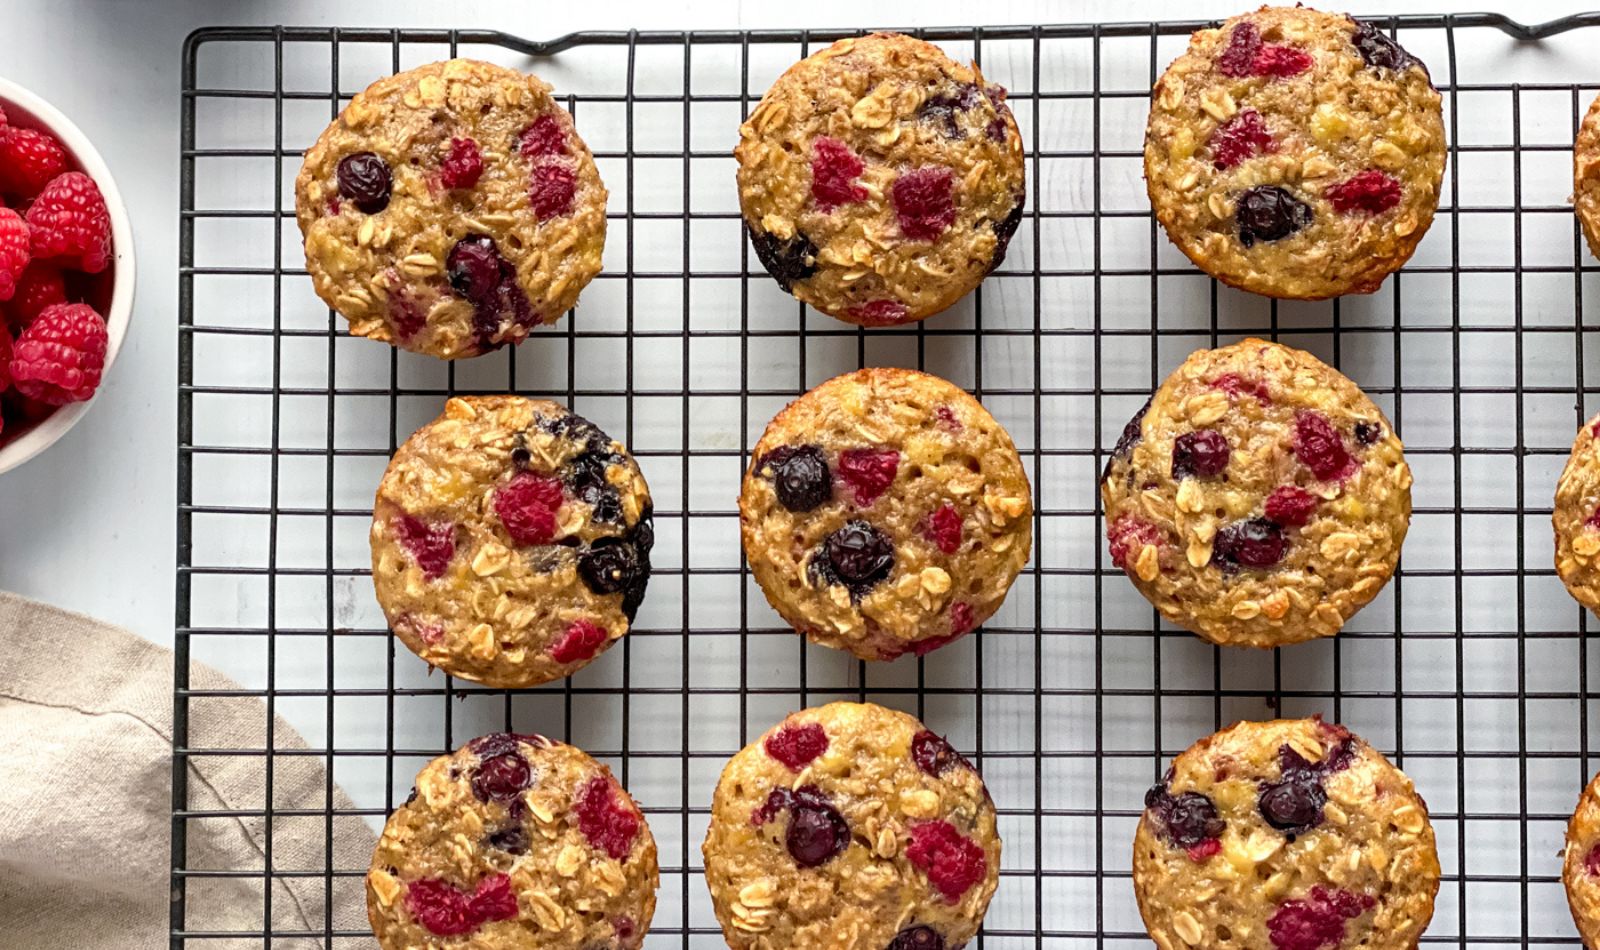 Berry Oatmeal Muffins